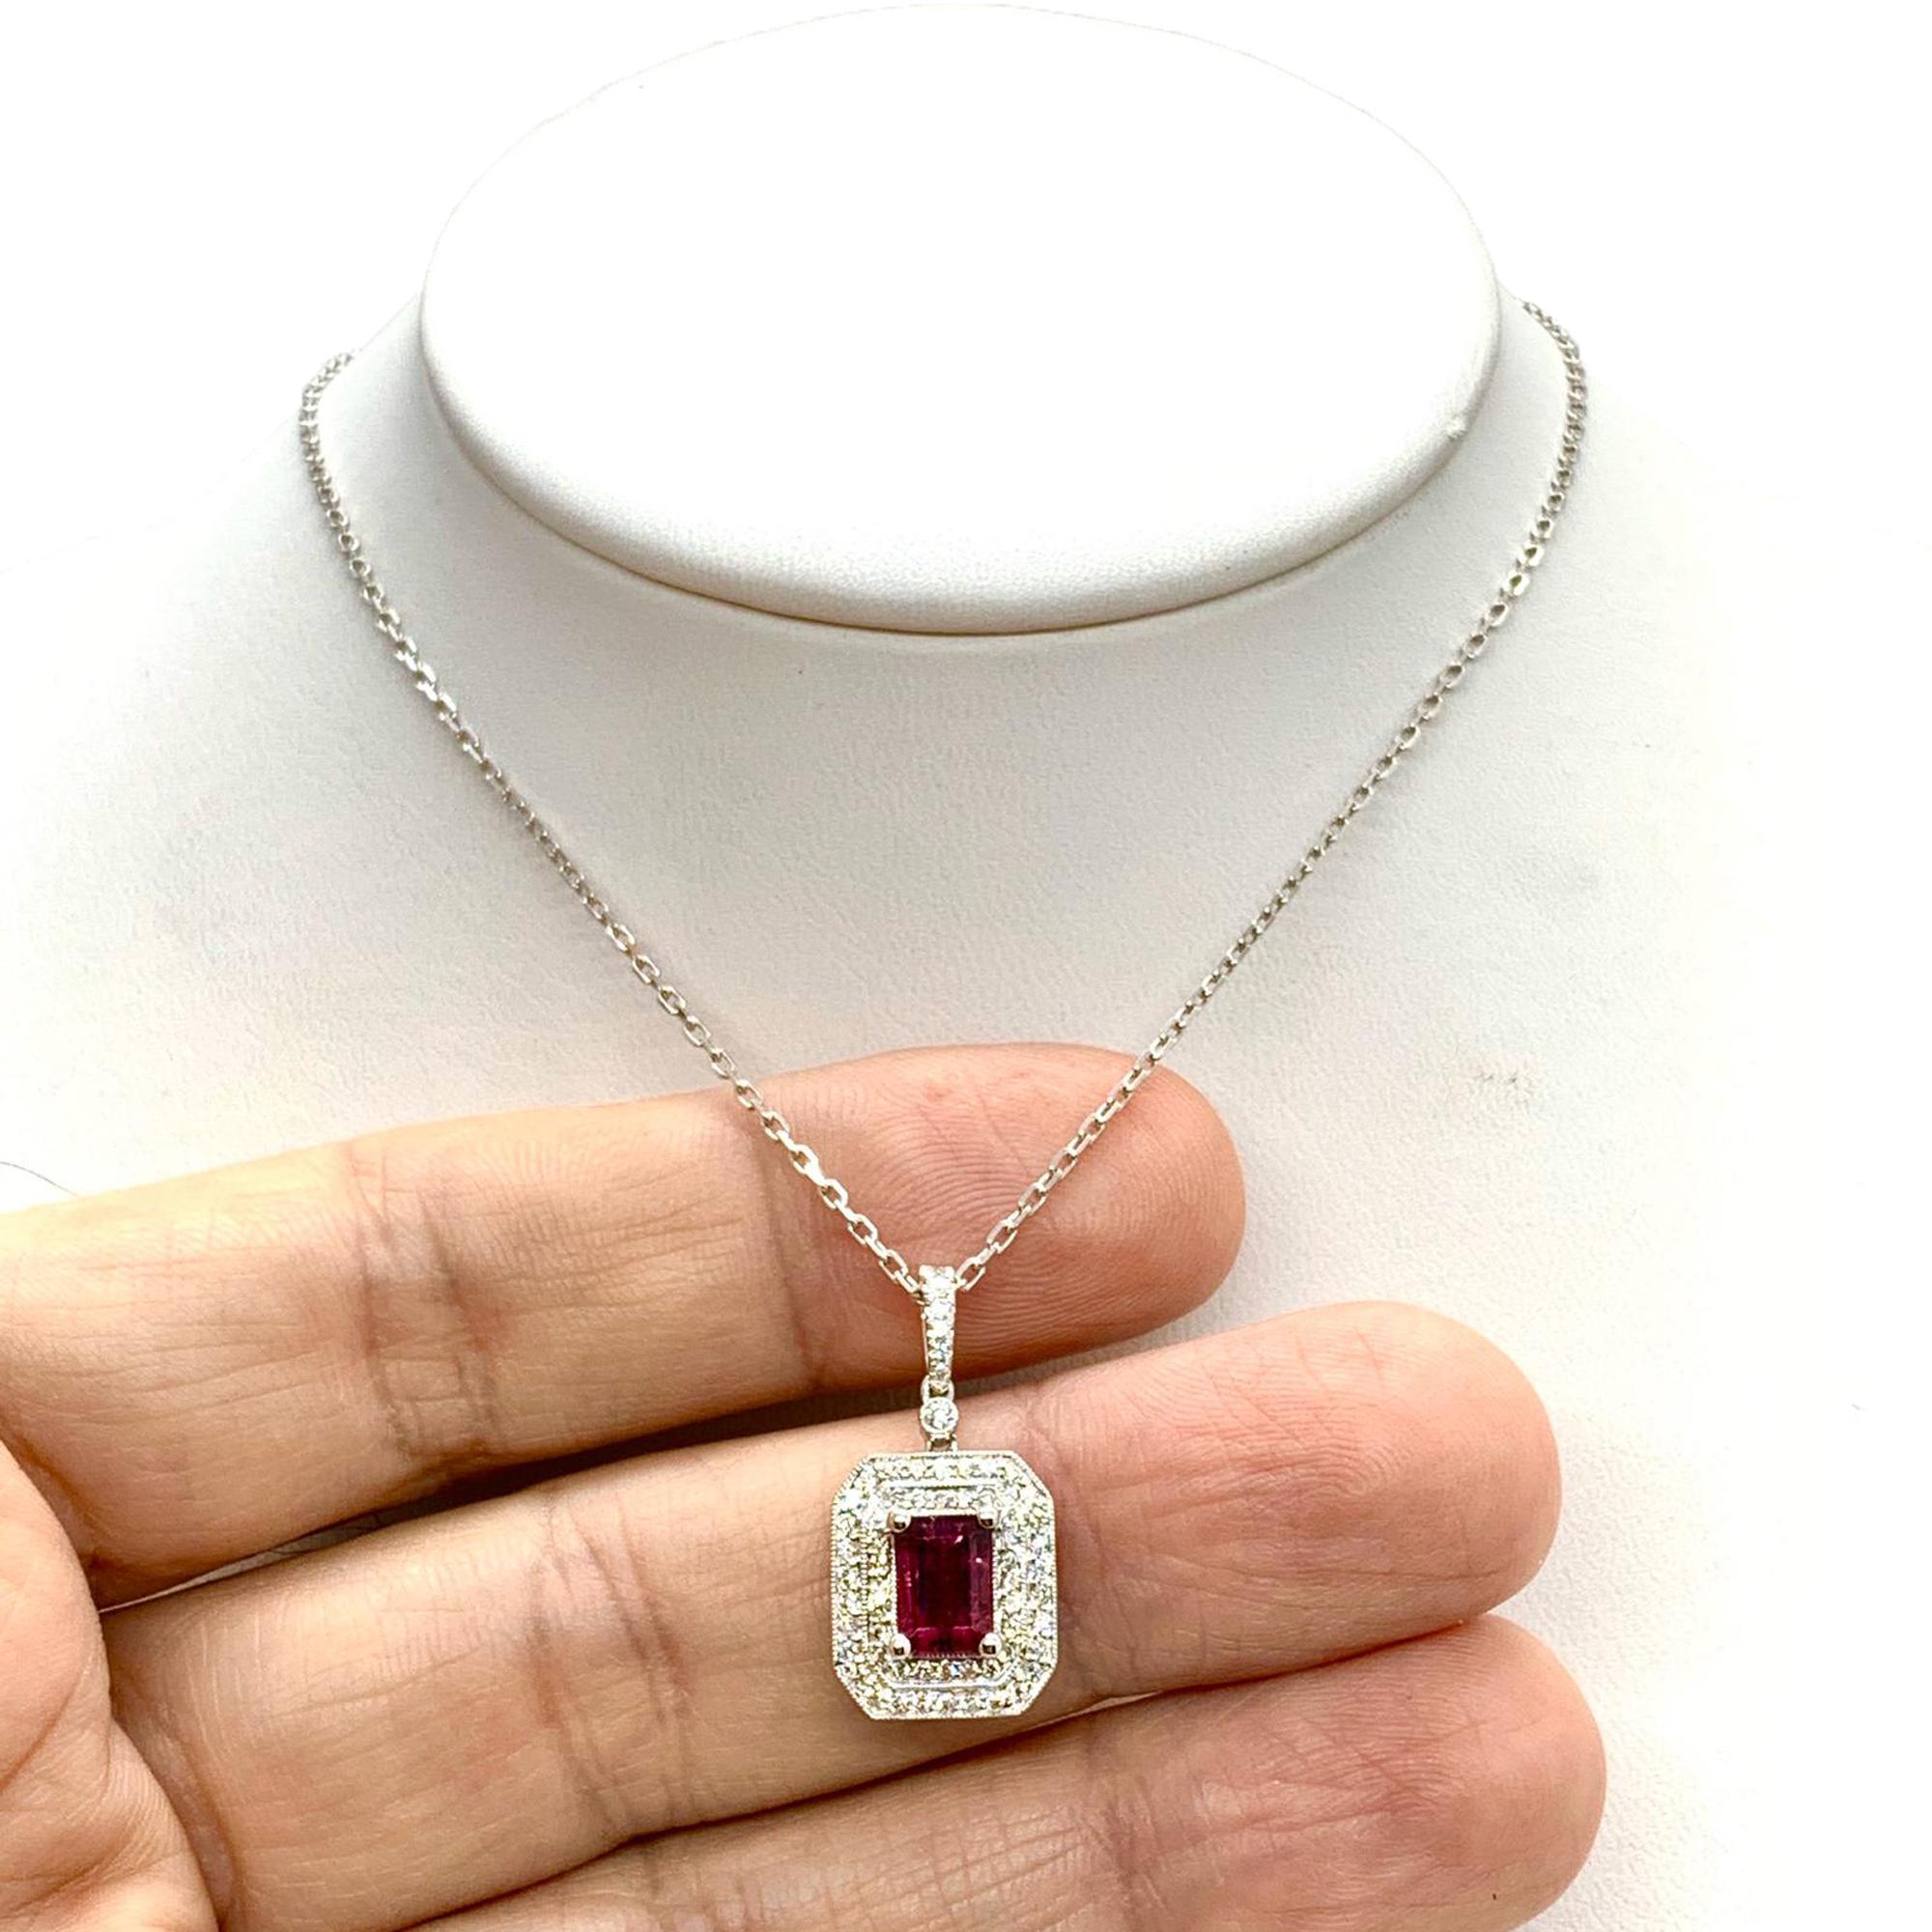 Natural Finely Faceted Quality Rubellite Tourmaline Diamond Necklace 18